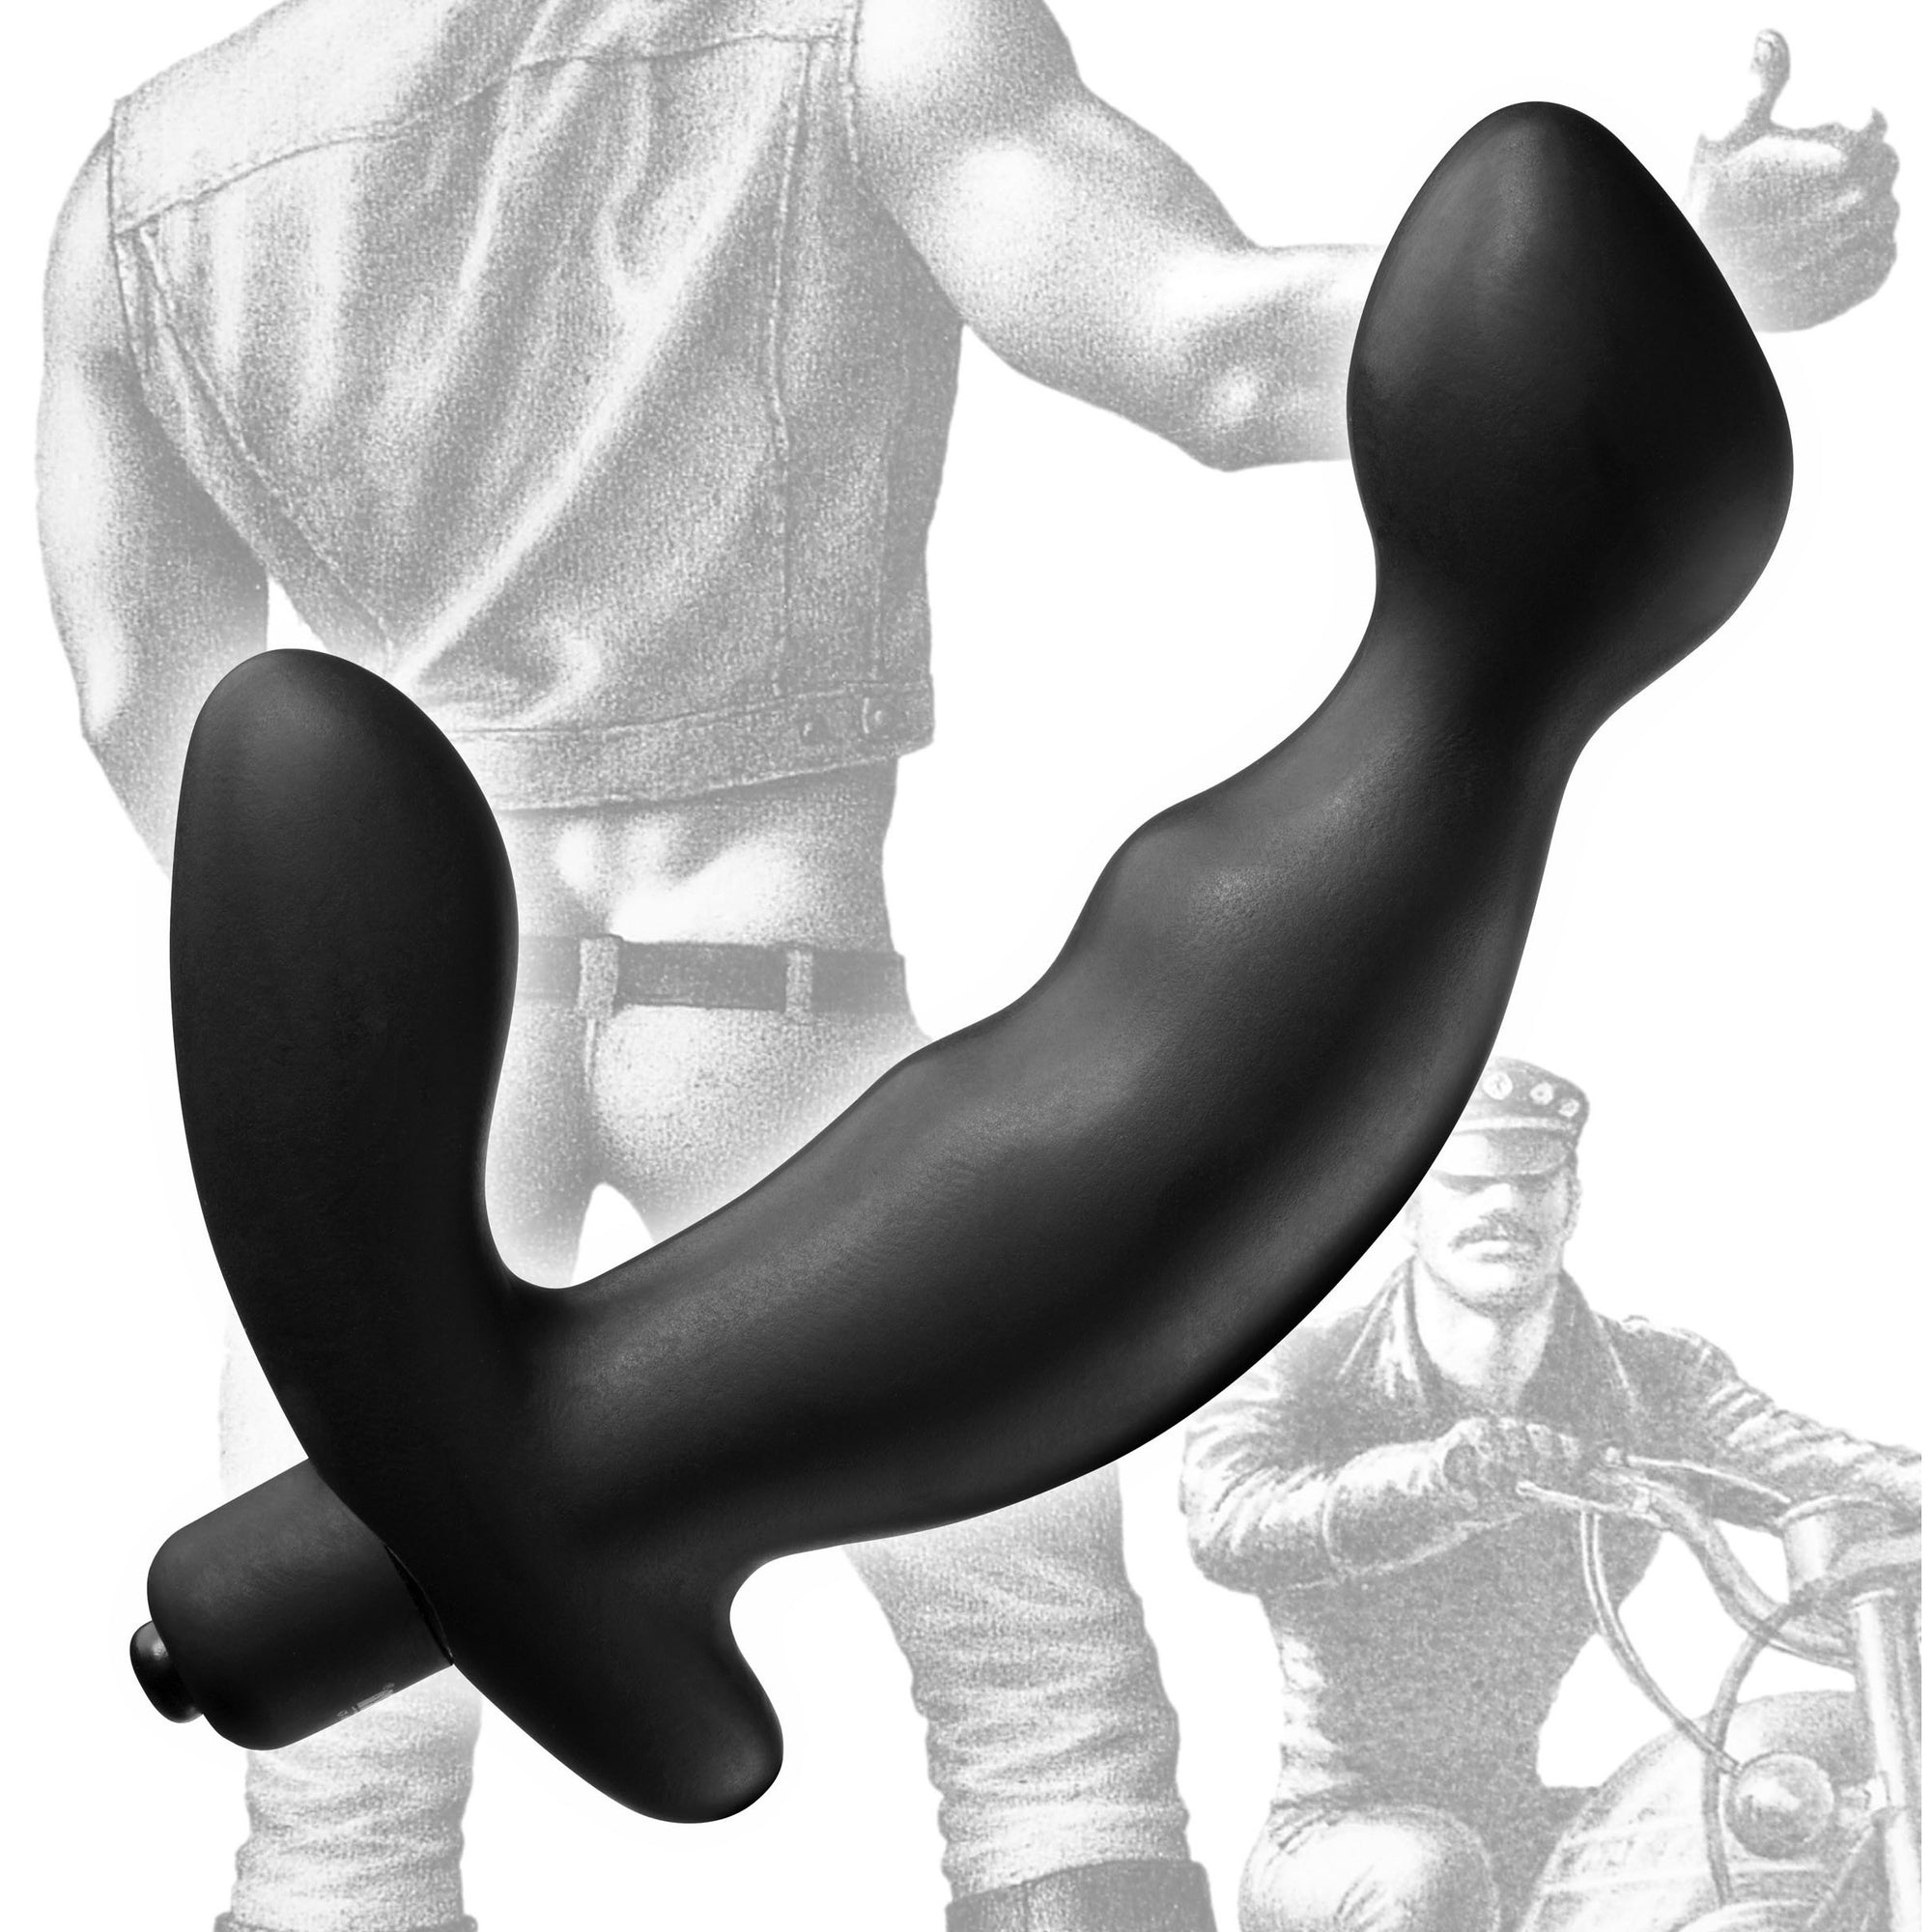 Tom of Finland Silicone P-Spot Vibe 
Anal Toys
Tom of Finland Cupid’s Secret Stash